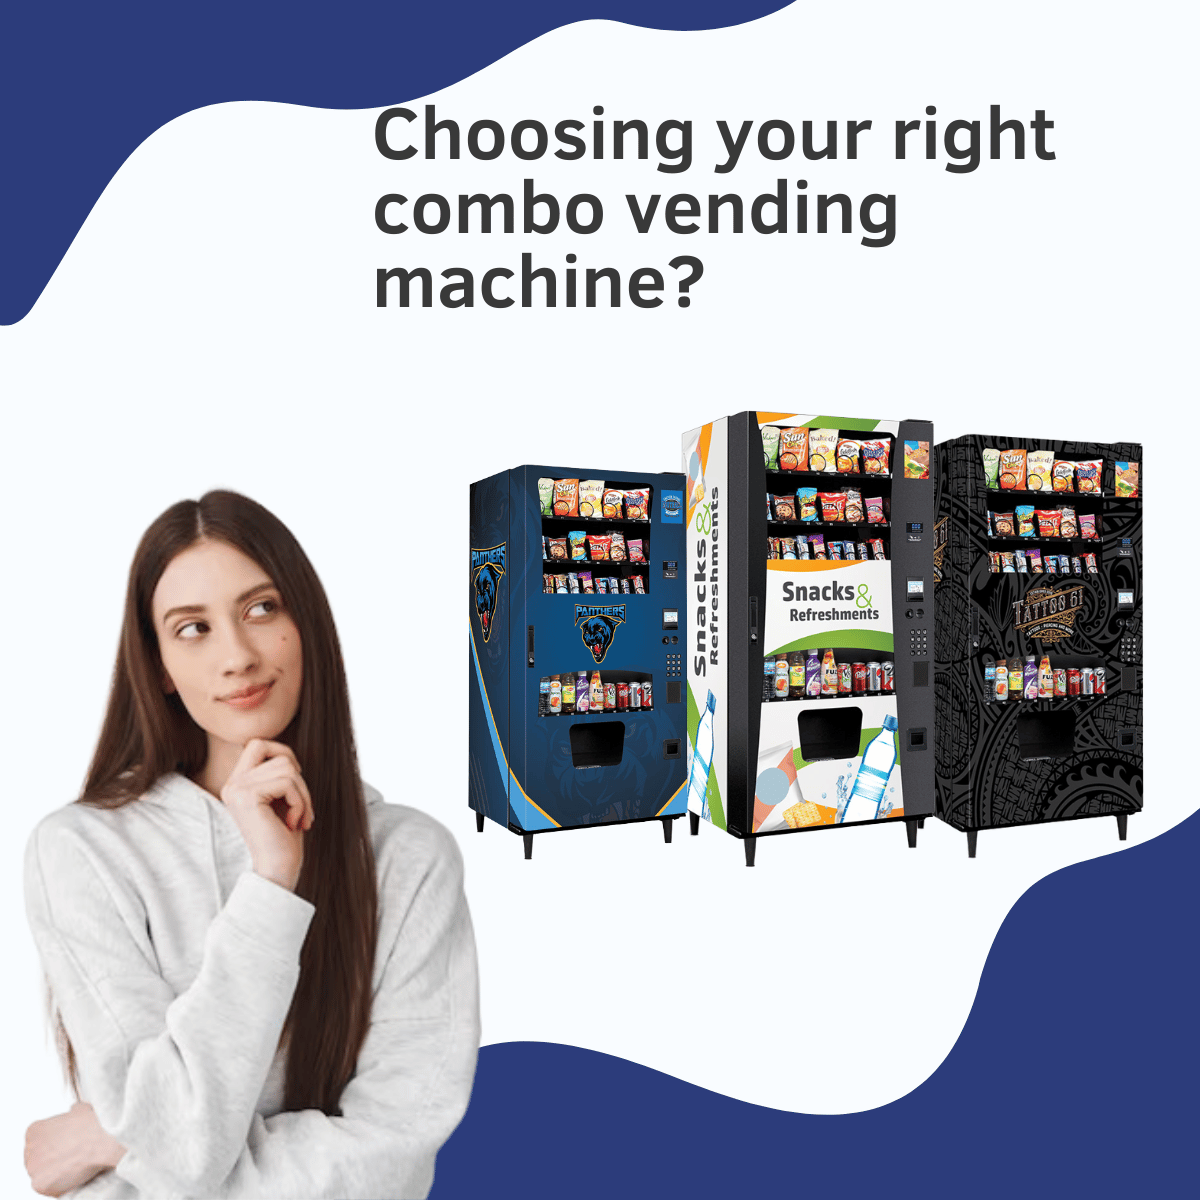 HOW TO CHOOSE THE RIGHT COMBO VENDING MACHINE FOR YOUR LOCATION